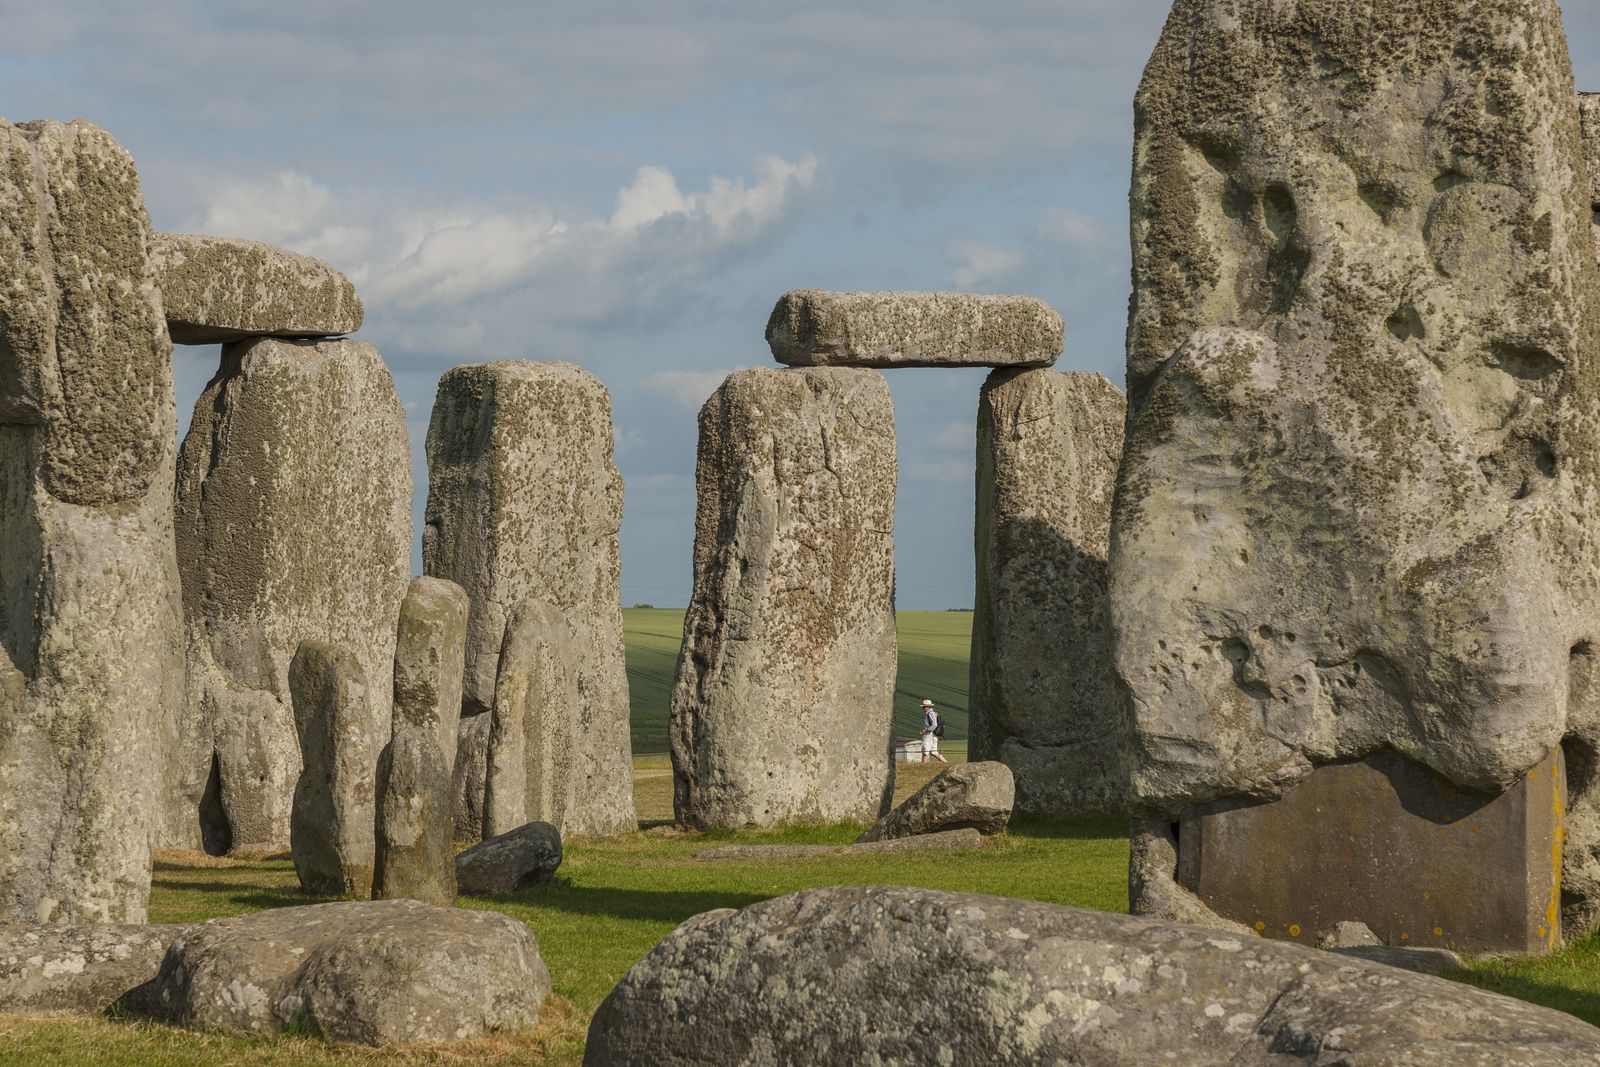 What Do Stonehenge and Japanese Stone Circles Have in Common?